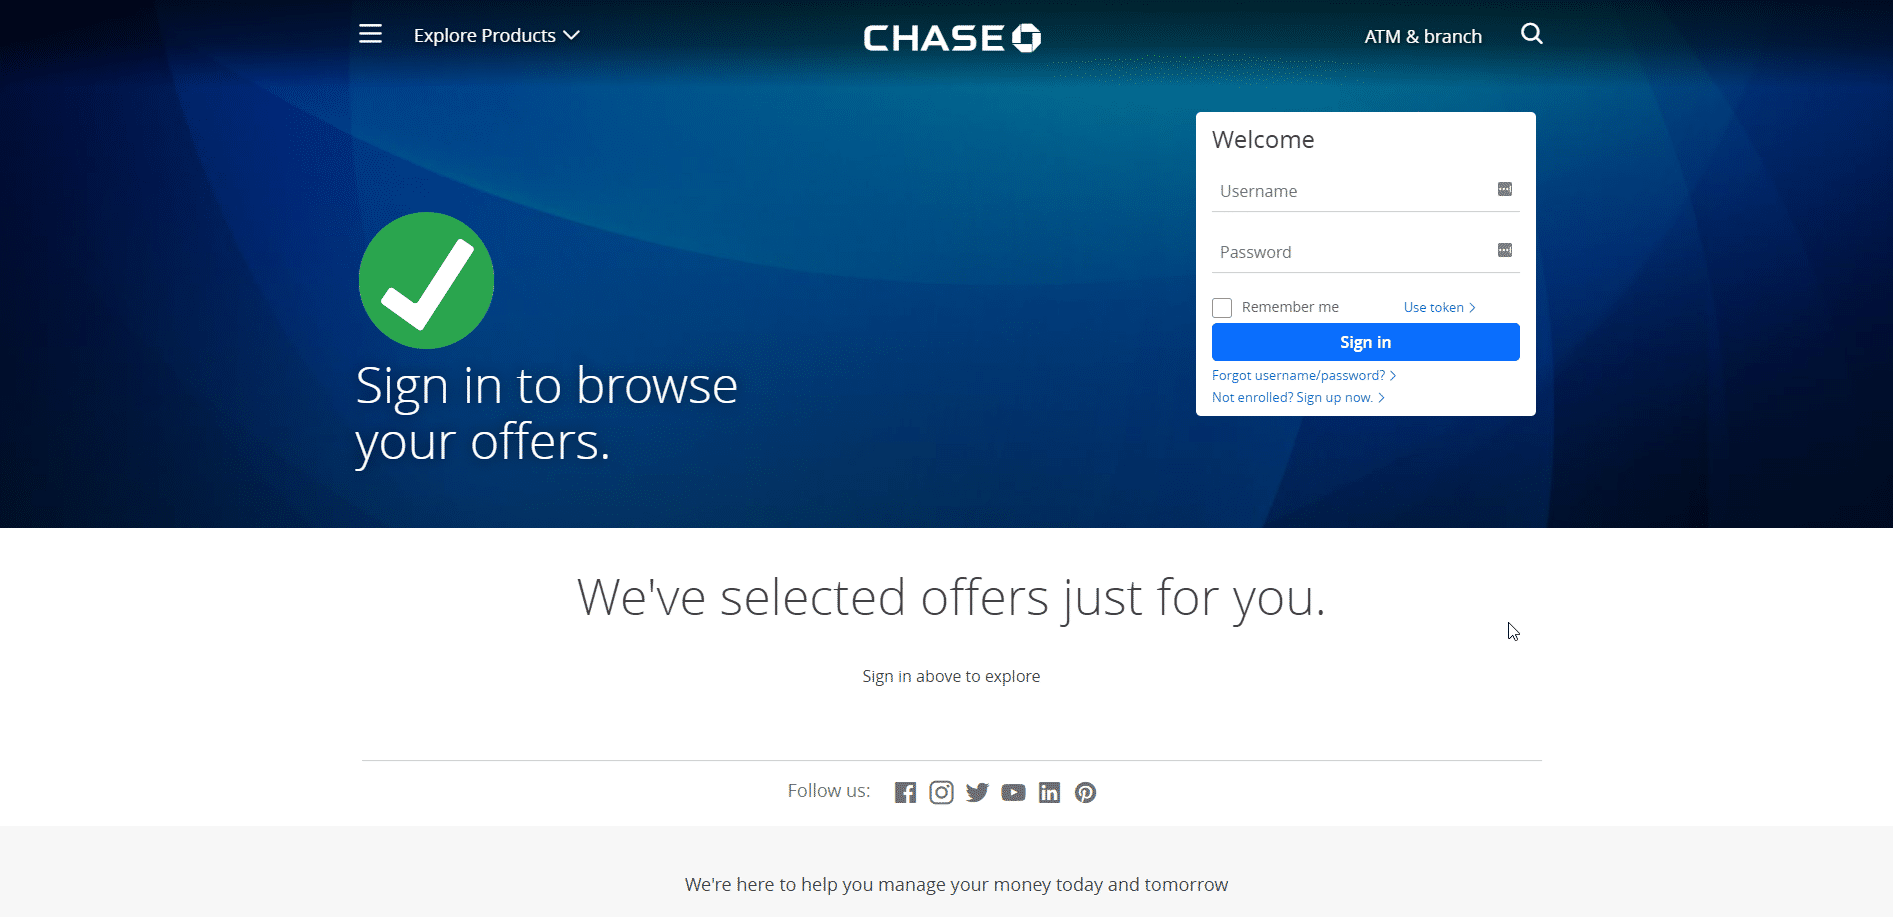 How To Find Your Routing And Account Number On A Chase Check